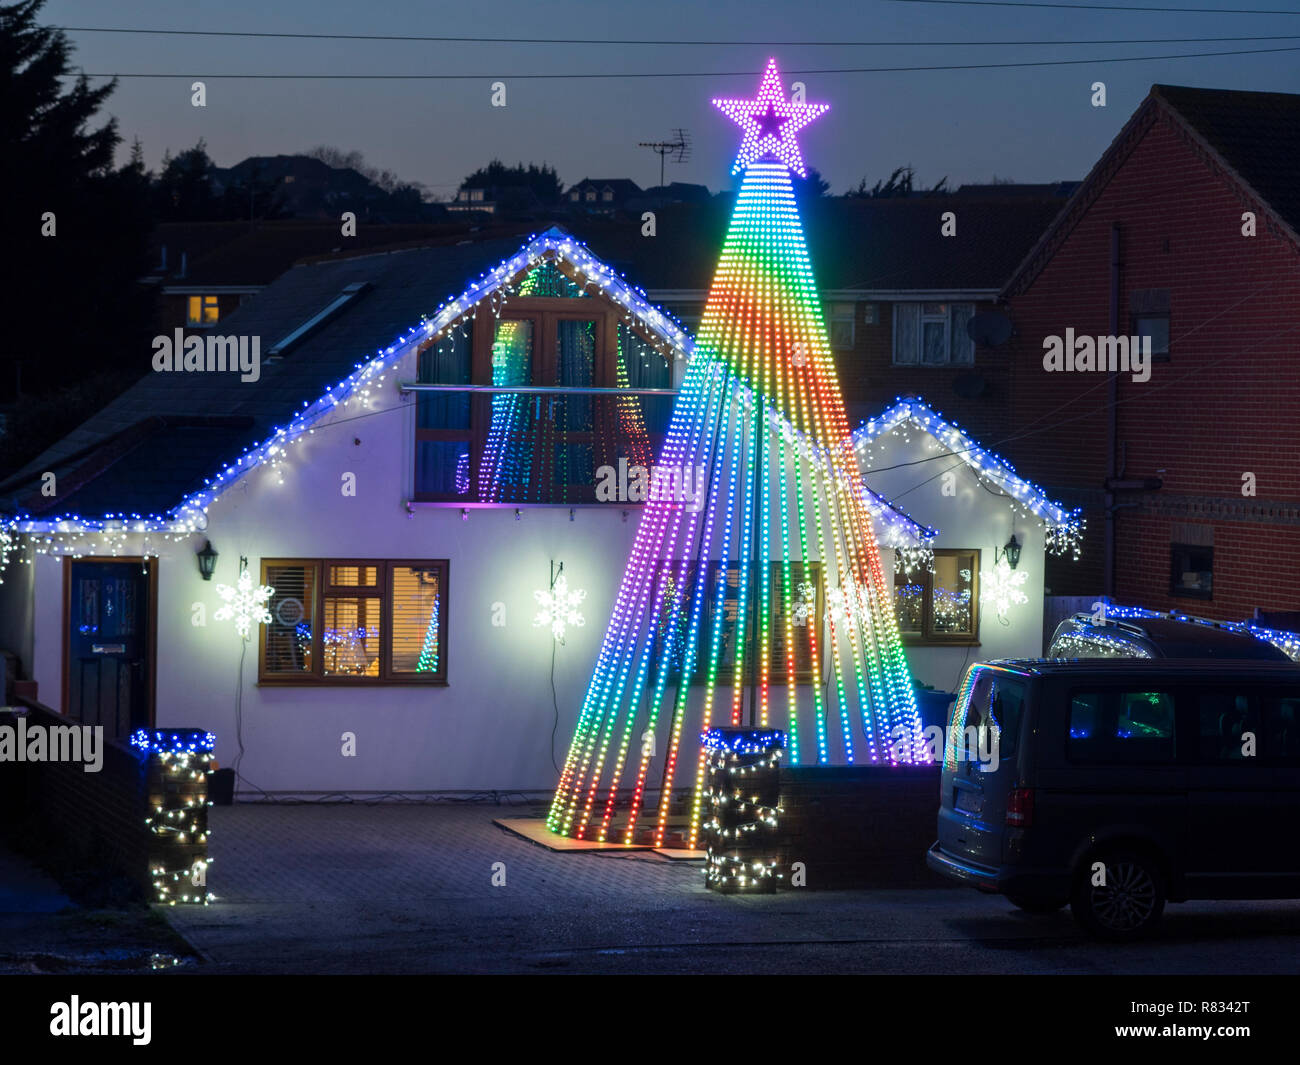 Warden Bay, Kent, UK. 12th December, 2018. A house in Warden Bay, Kent features an impressive Christmas lighting display featuring a huge Christmas Tree (taller than the property) and covered in computer controlled lights that run through various patterns. The display is well known locally as the Jetty Road Christmas Lights. Credit: James Bell/Alamy Live News Stock Photo